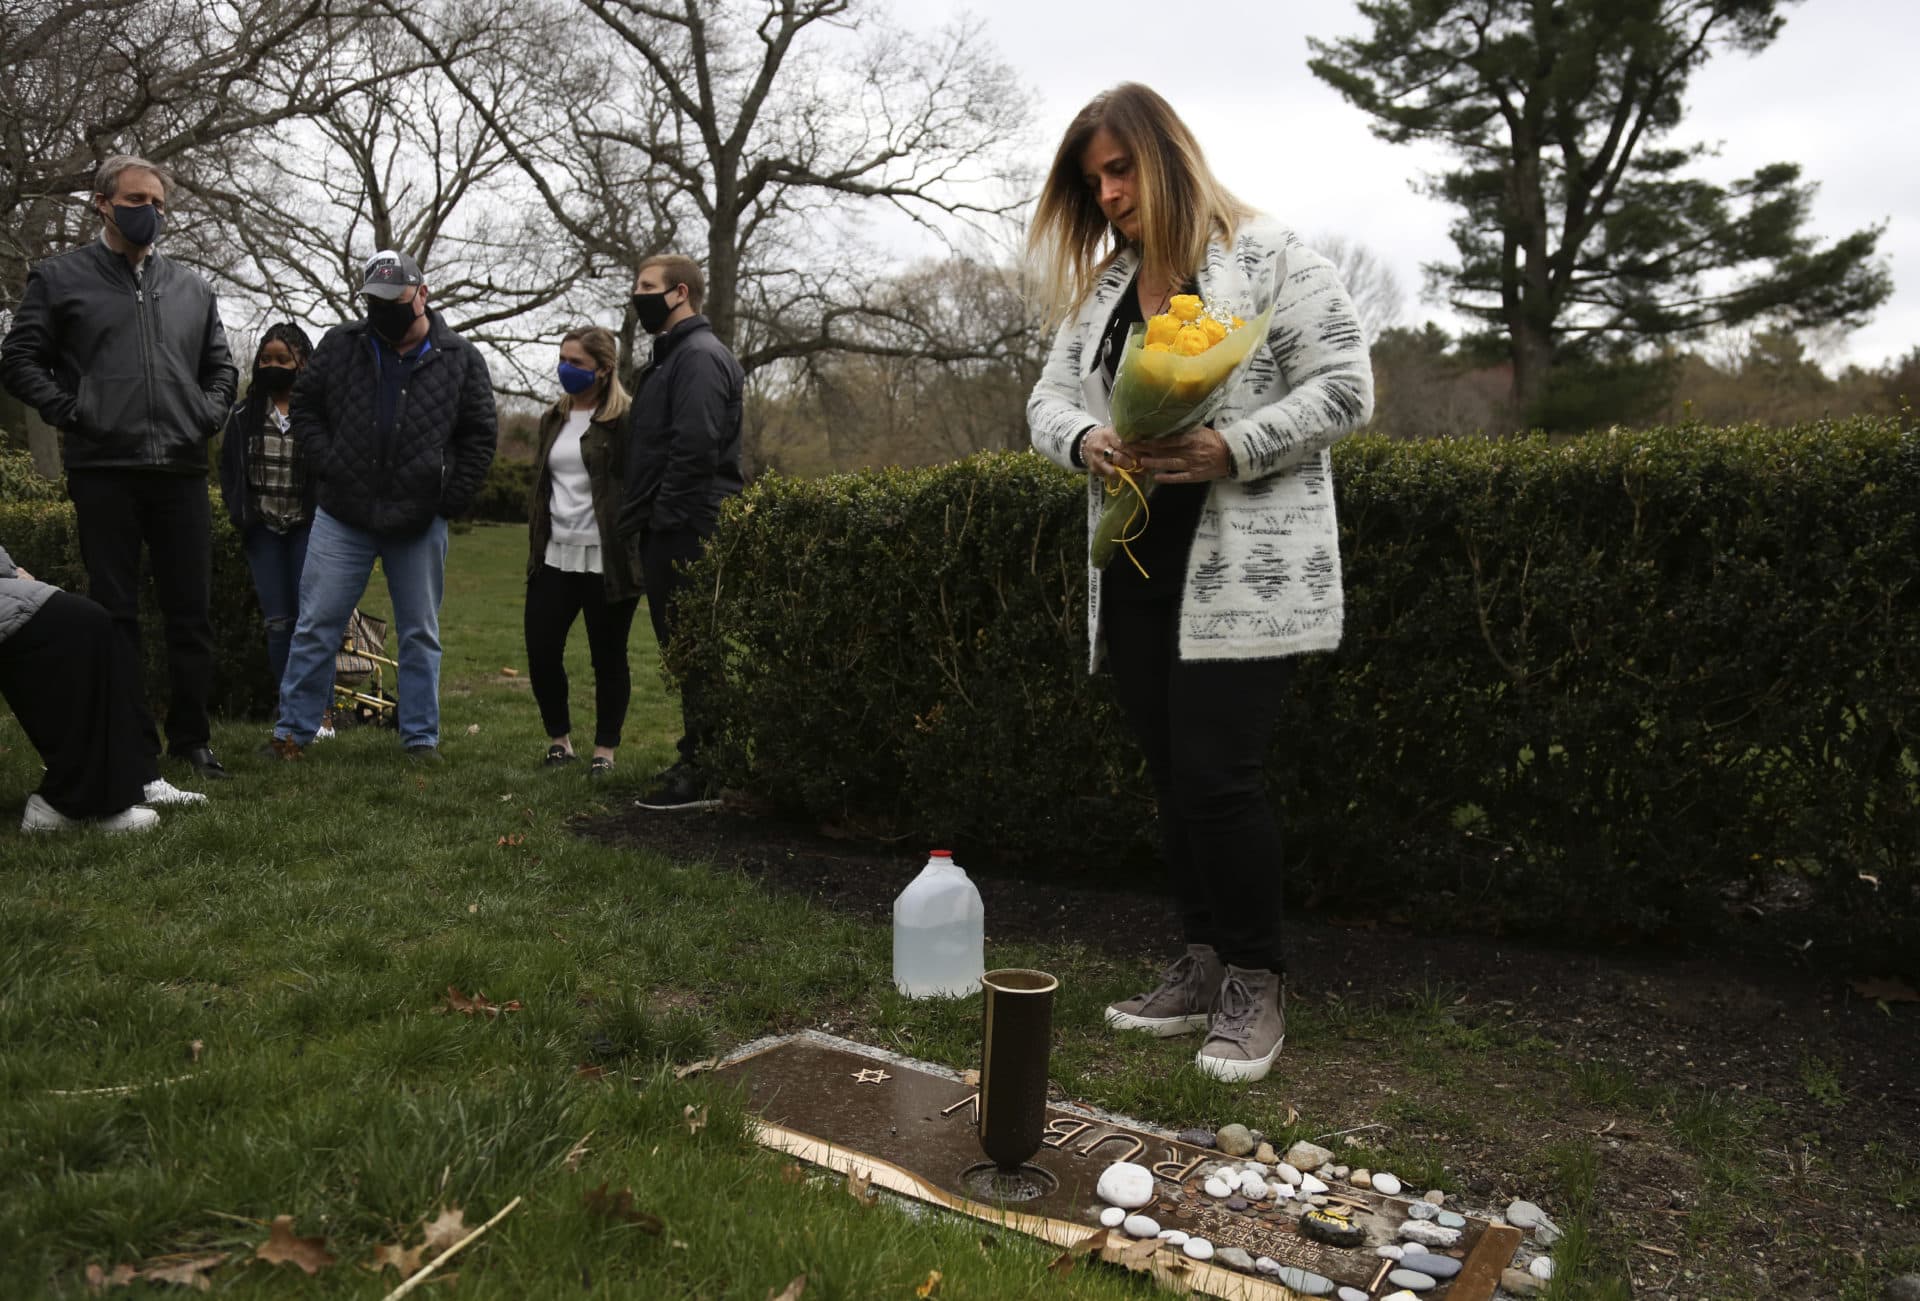 Michelle Pepe places a bouquet of yellow roses on her father's grave as family and friends watch in Sharon, Mass., on Tuesday, April 13, 2021.  (Jessie Wardarski/AP)